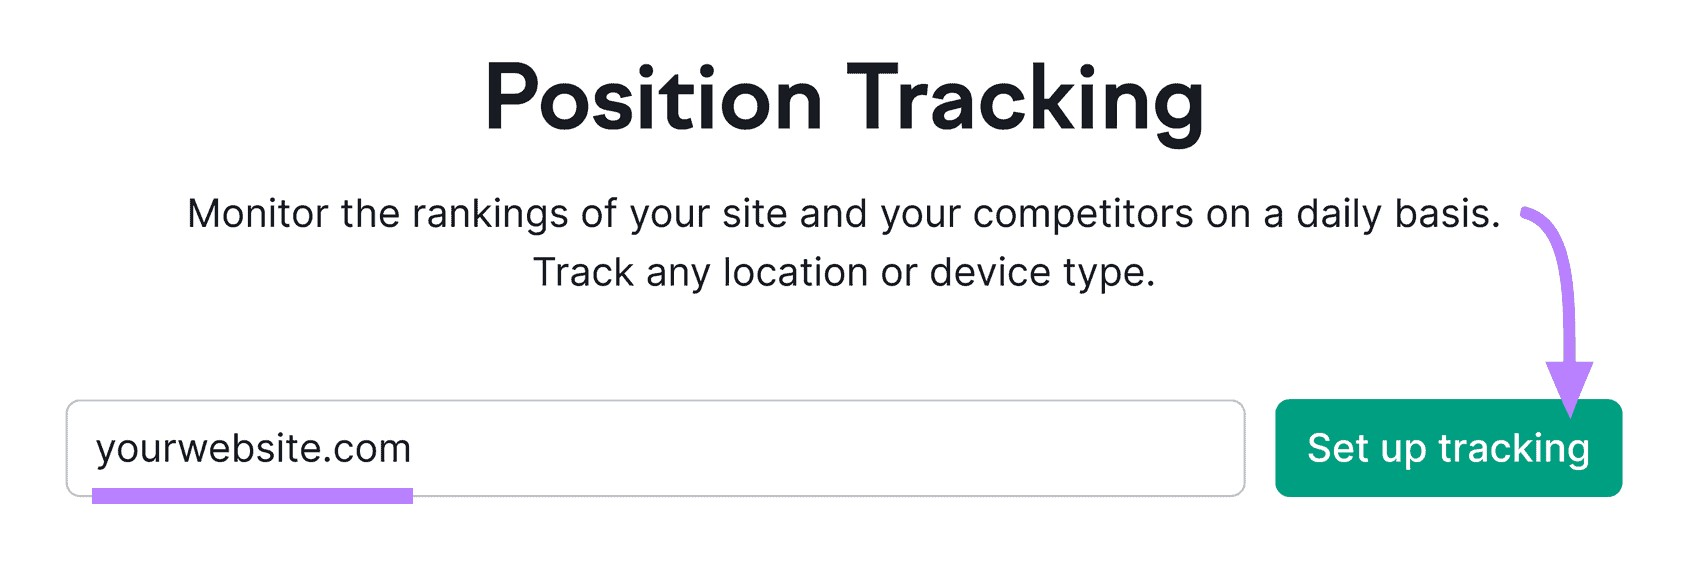 Position Tracking search